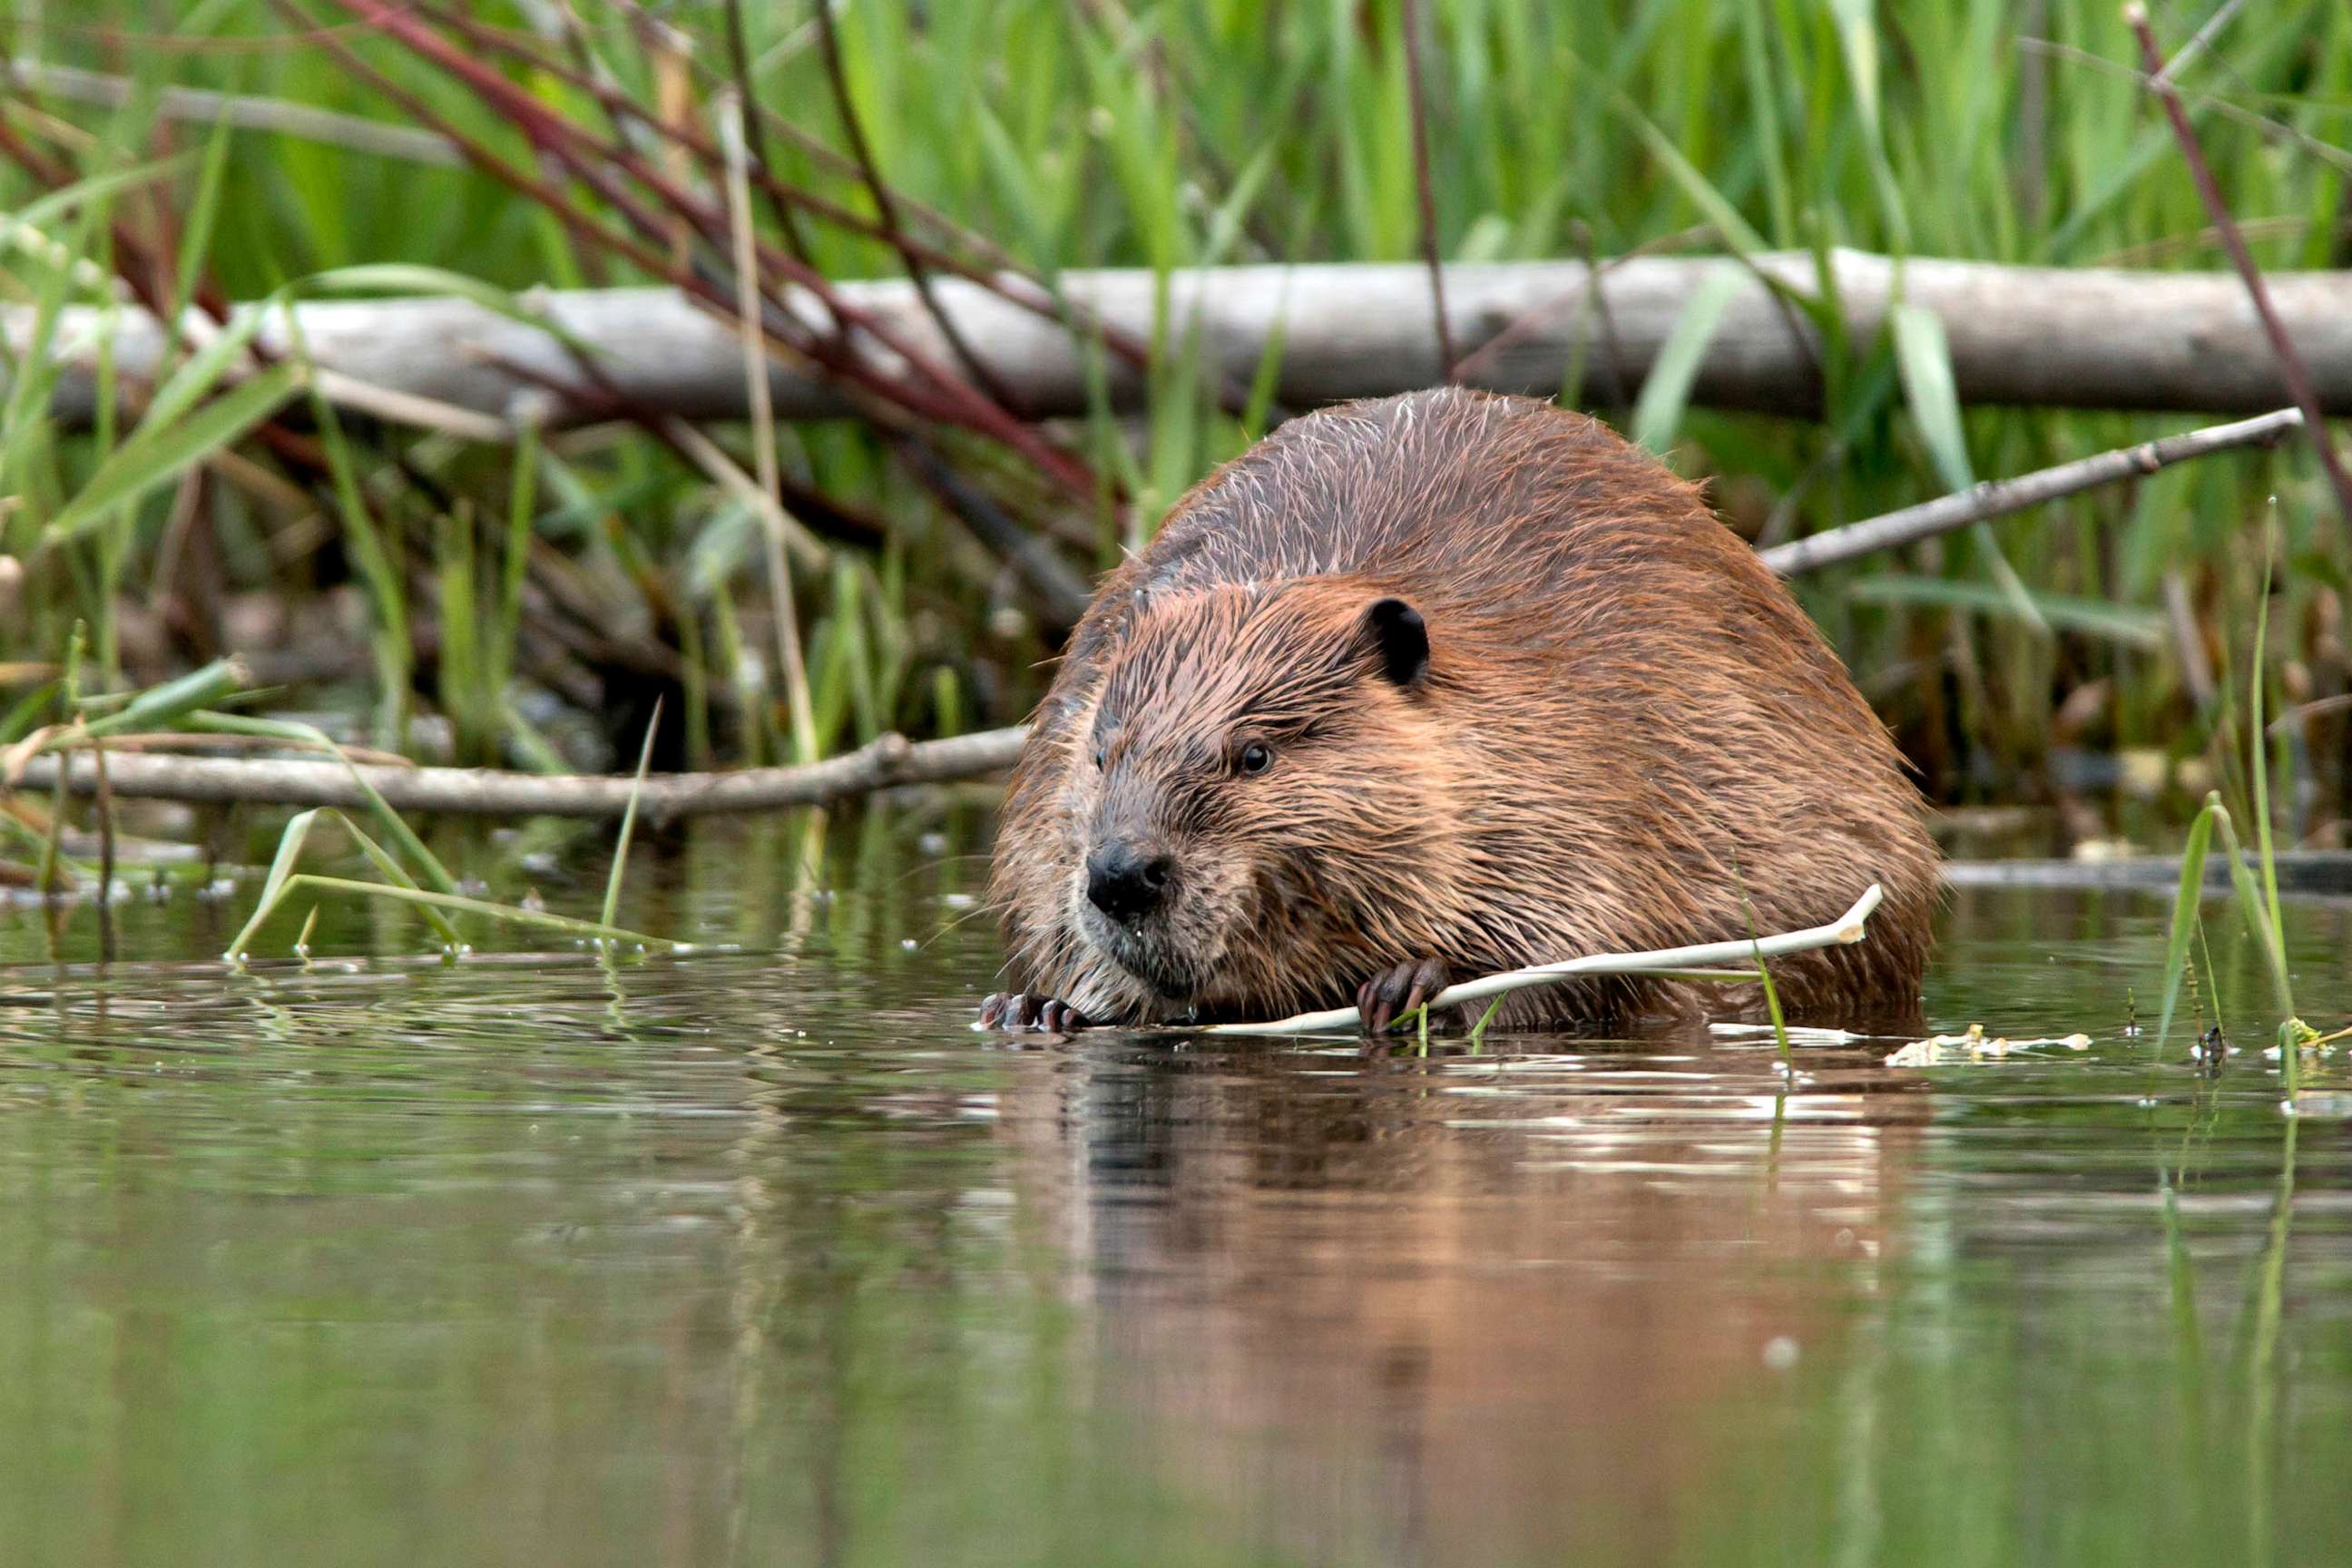 PHOTO: In this undated file photo, a beaver appears near the shoreline of the Bear Creek which feeds into the South Platte River just outside Denver, Colorado.